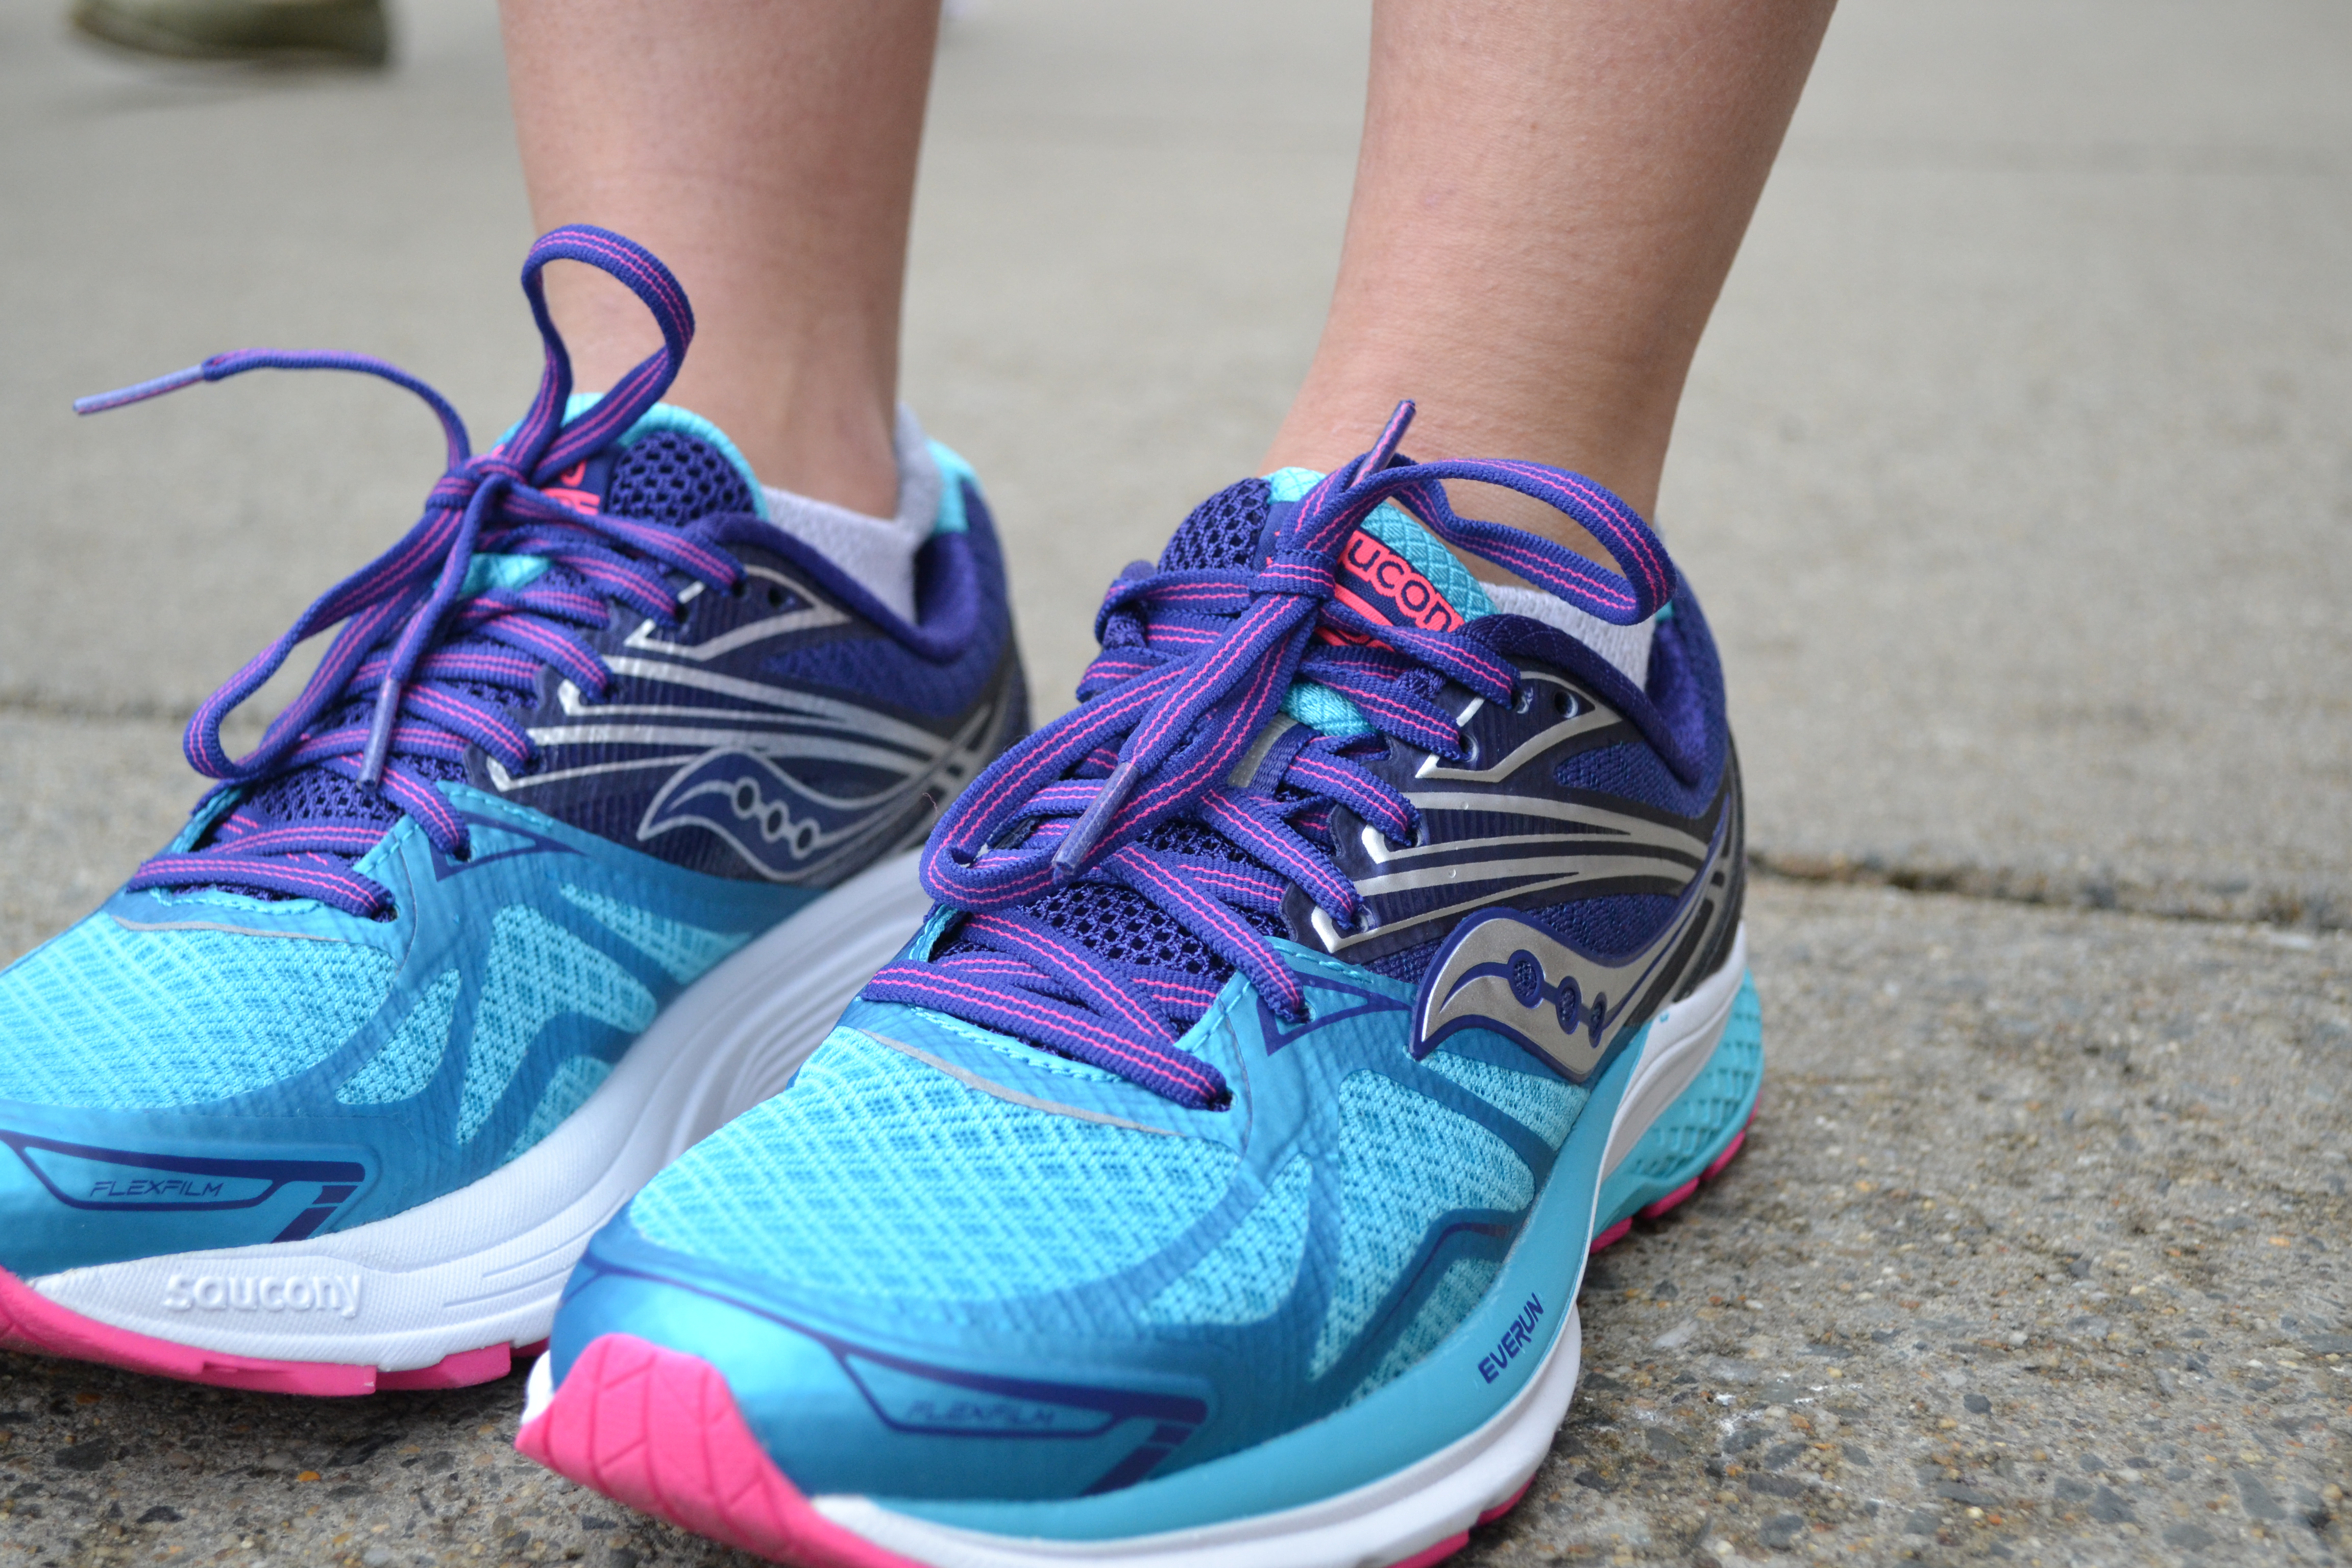 SHOE REVIEW: Saucony Ride 9 – LIFE IN 